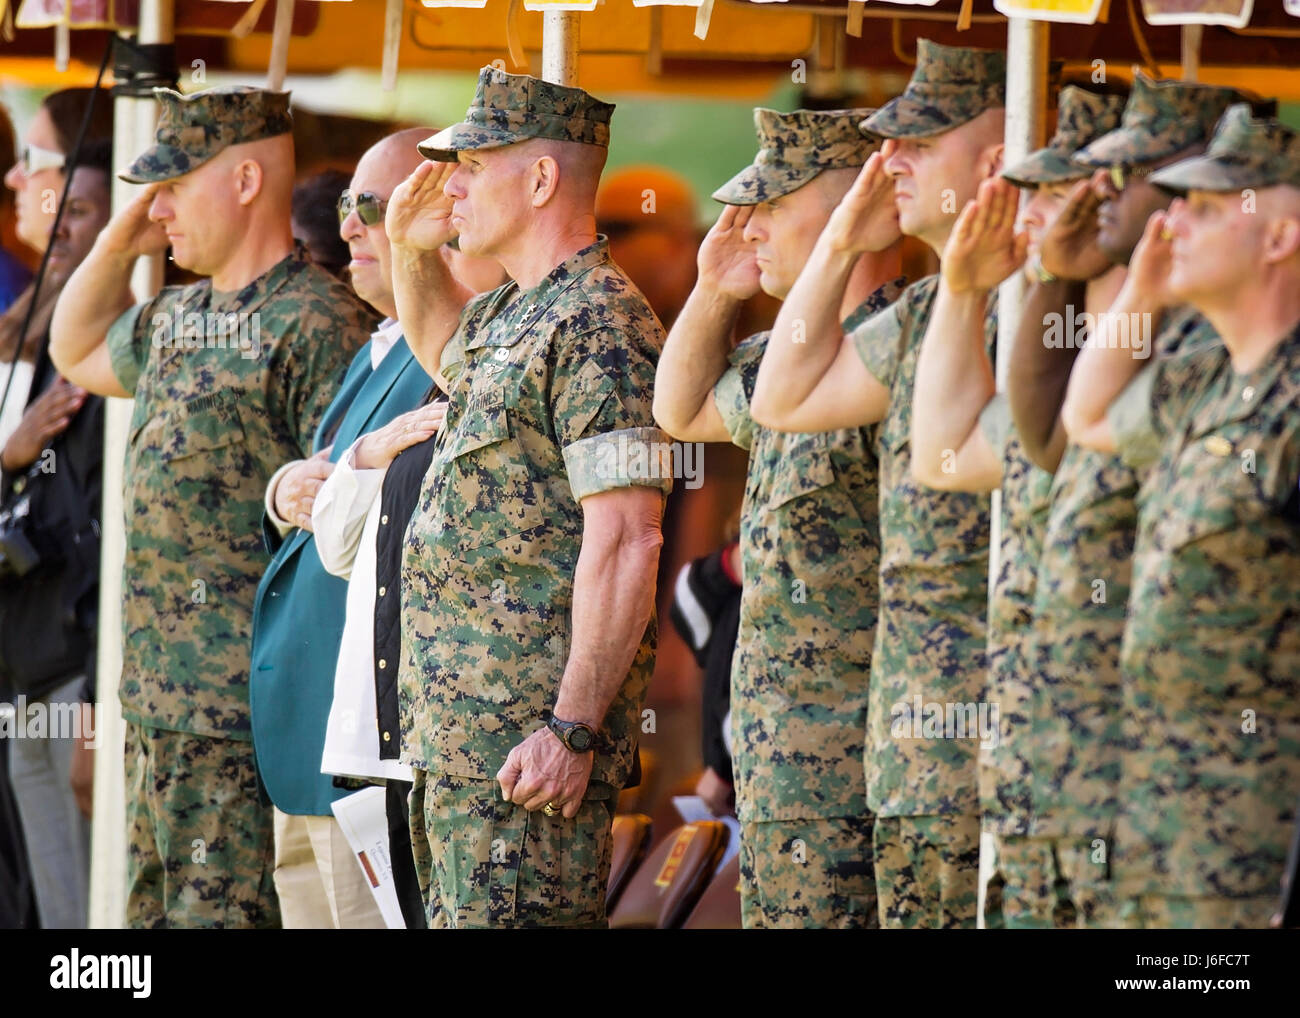 Attendees of the Centennial Celebration Ceremony salute during the playing of the national anthem at Lejeune Field, Marine Corps Base (MCB) Quantico, Va., May 10, 2017. The event commemorates the founding of MCB Quantico in 1917, and consisted of performances by the U.S. Marine Corps Silent Drill Platoon and the U.S. Marine Drum & Bugle Corps. (U.S. Marine Corps photo by James H. Frank) Stock Photo